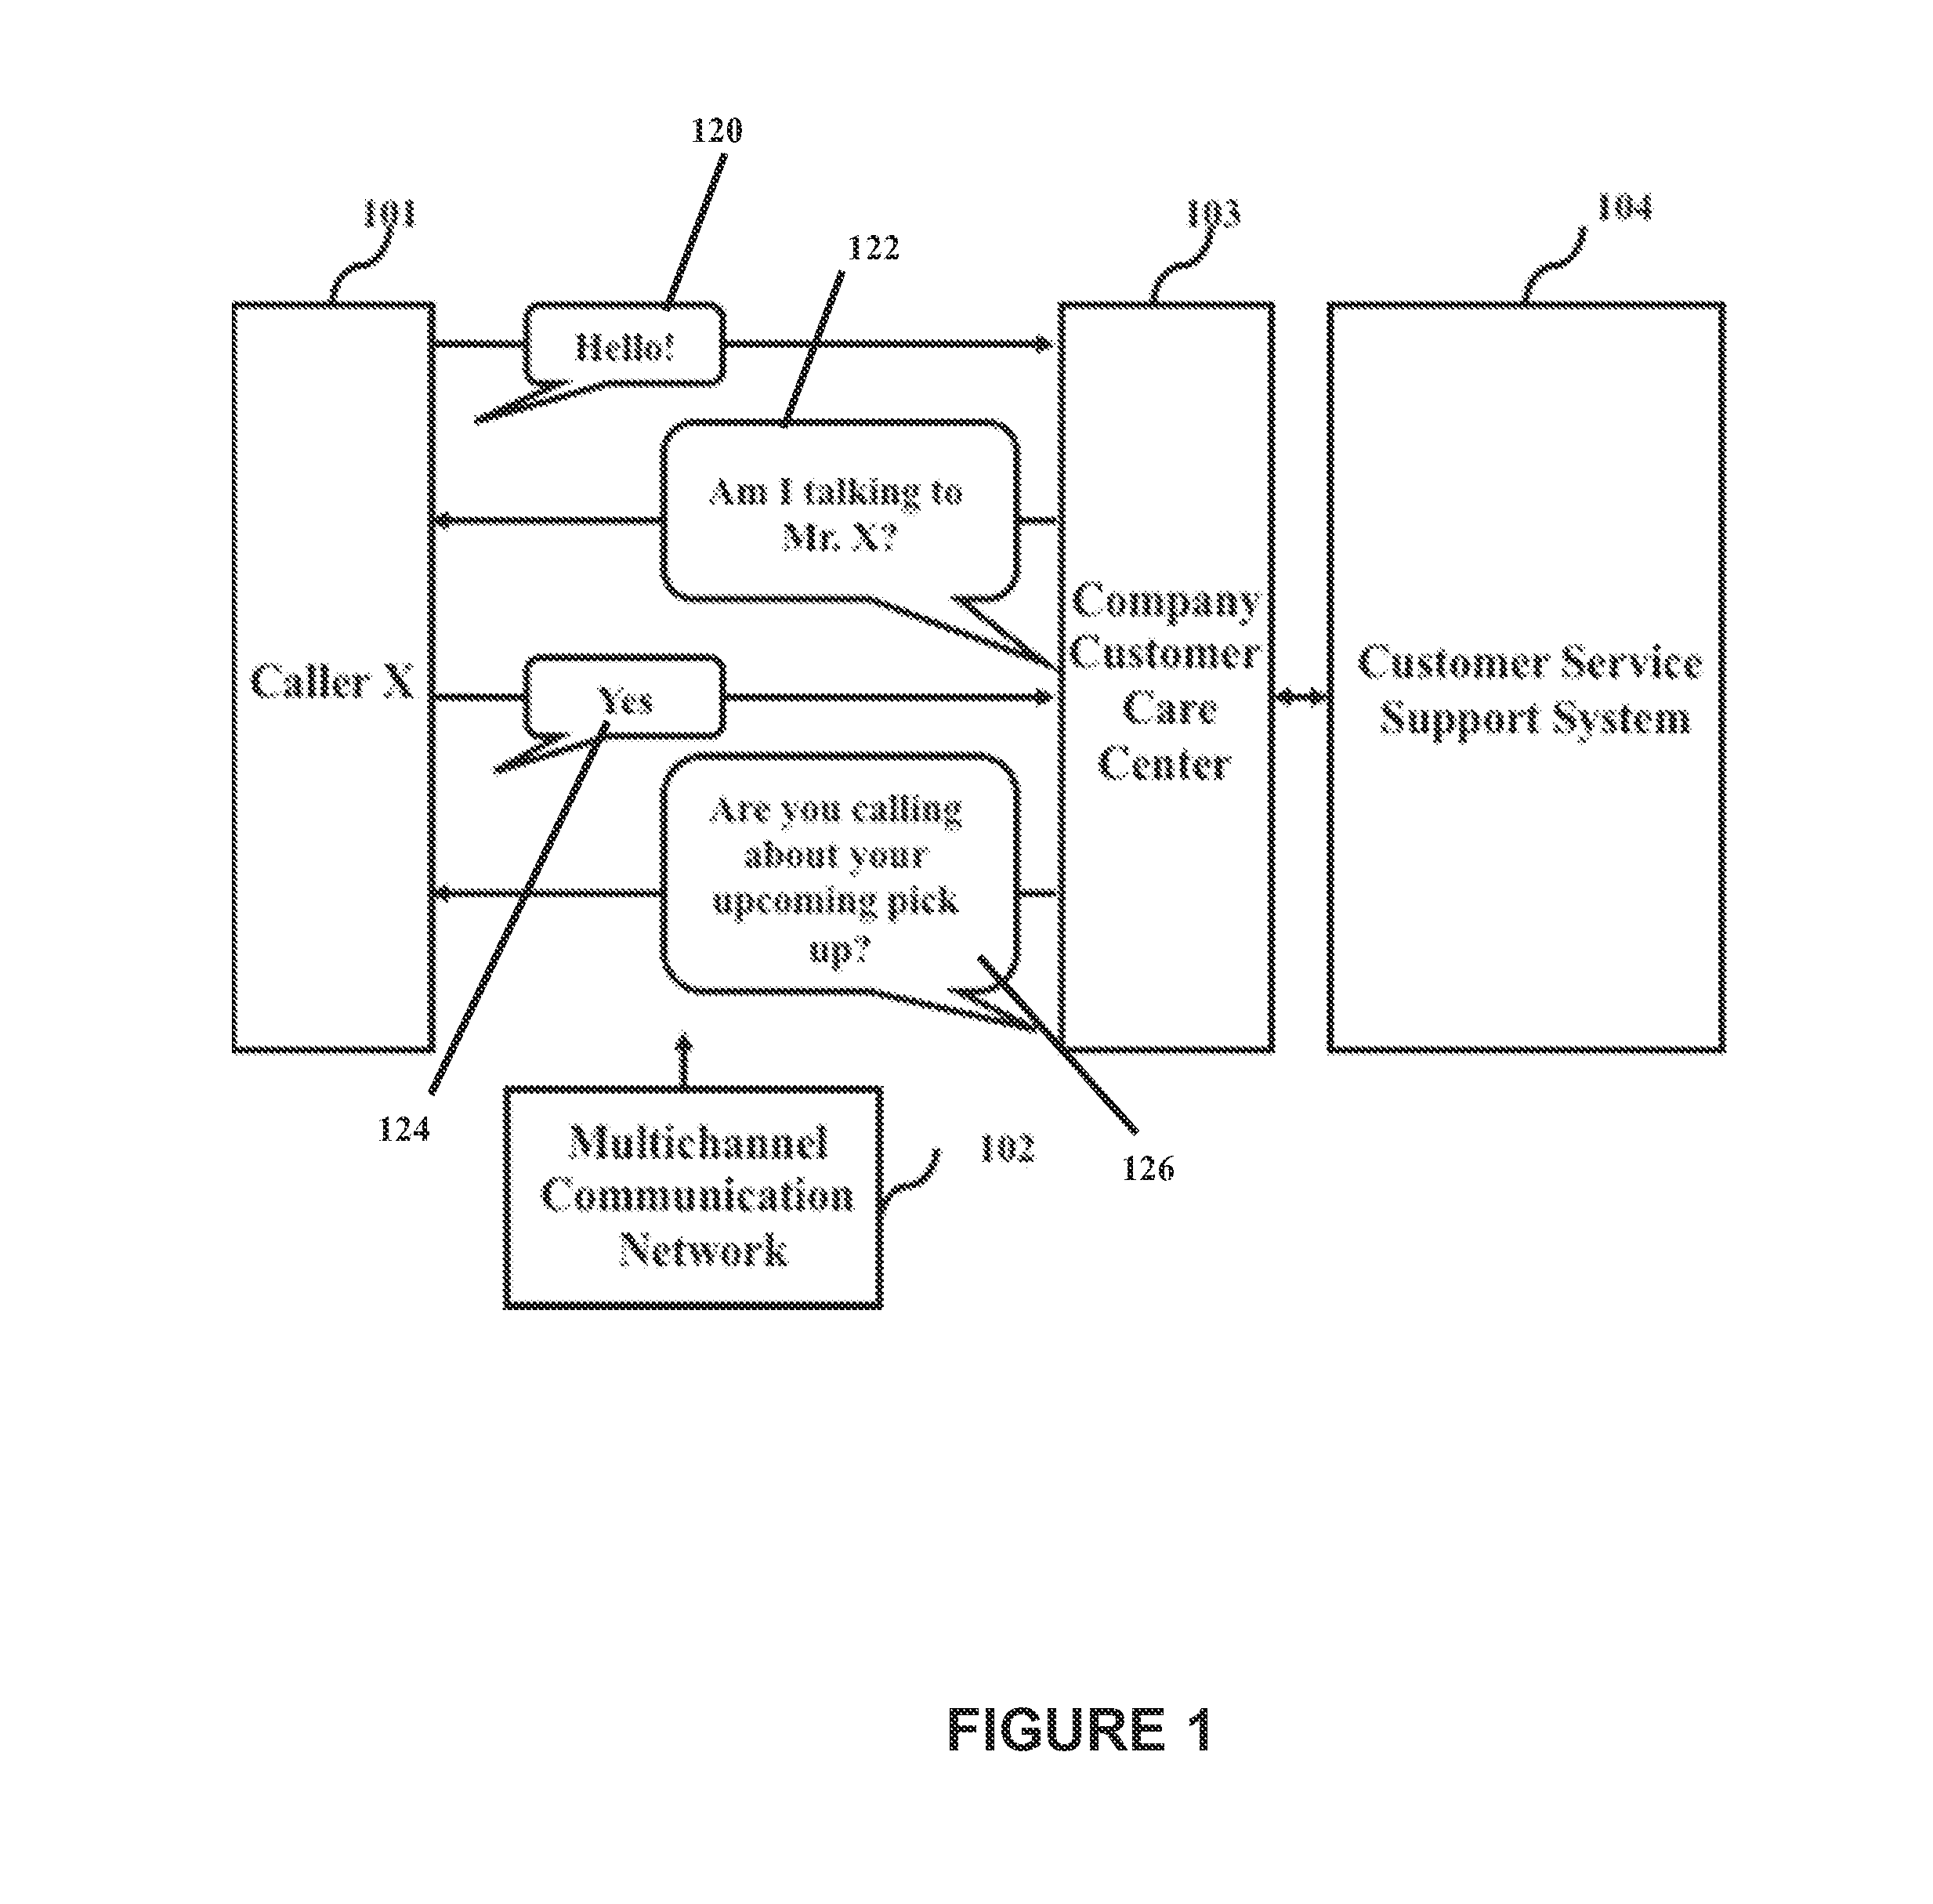 Method and apparatus for intent prediction and proactive service offering